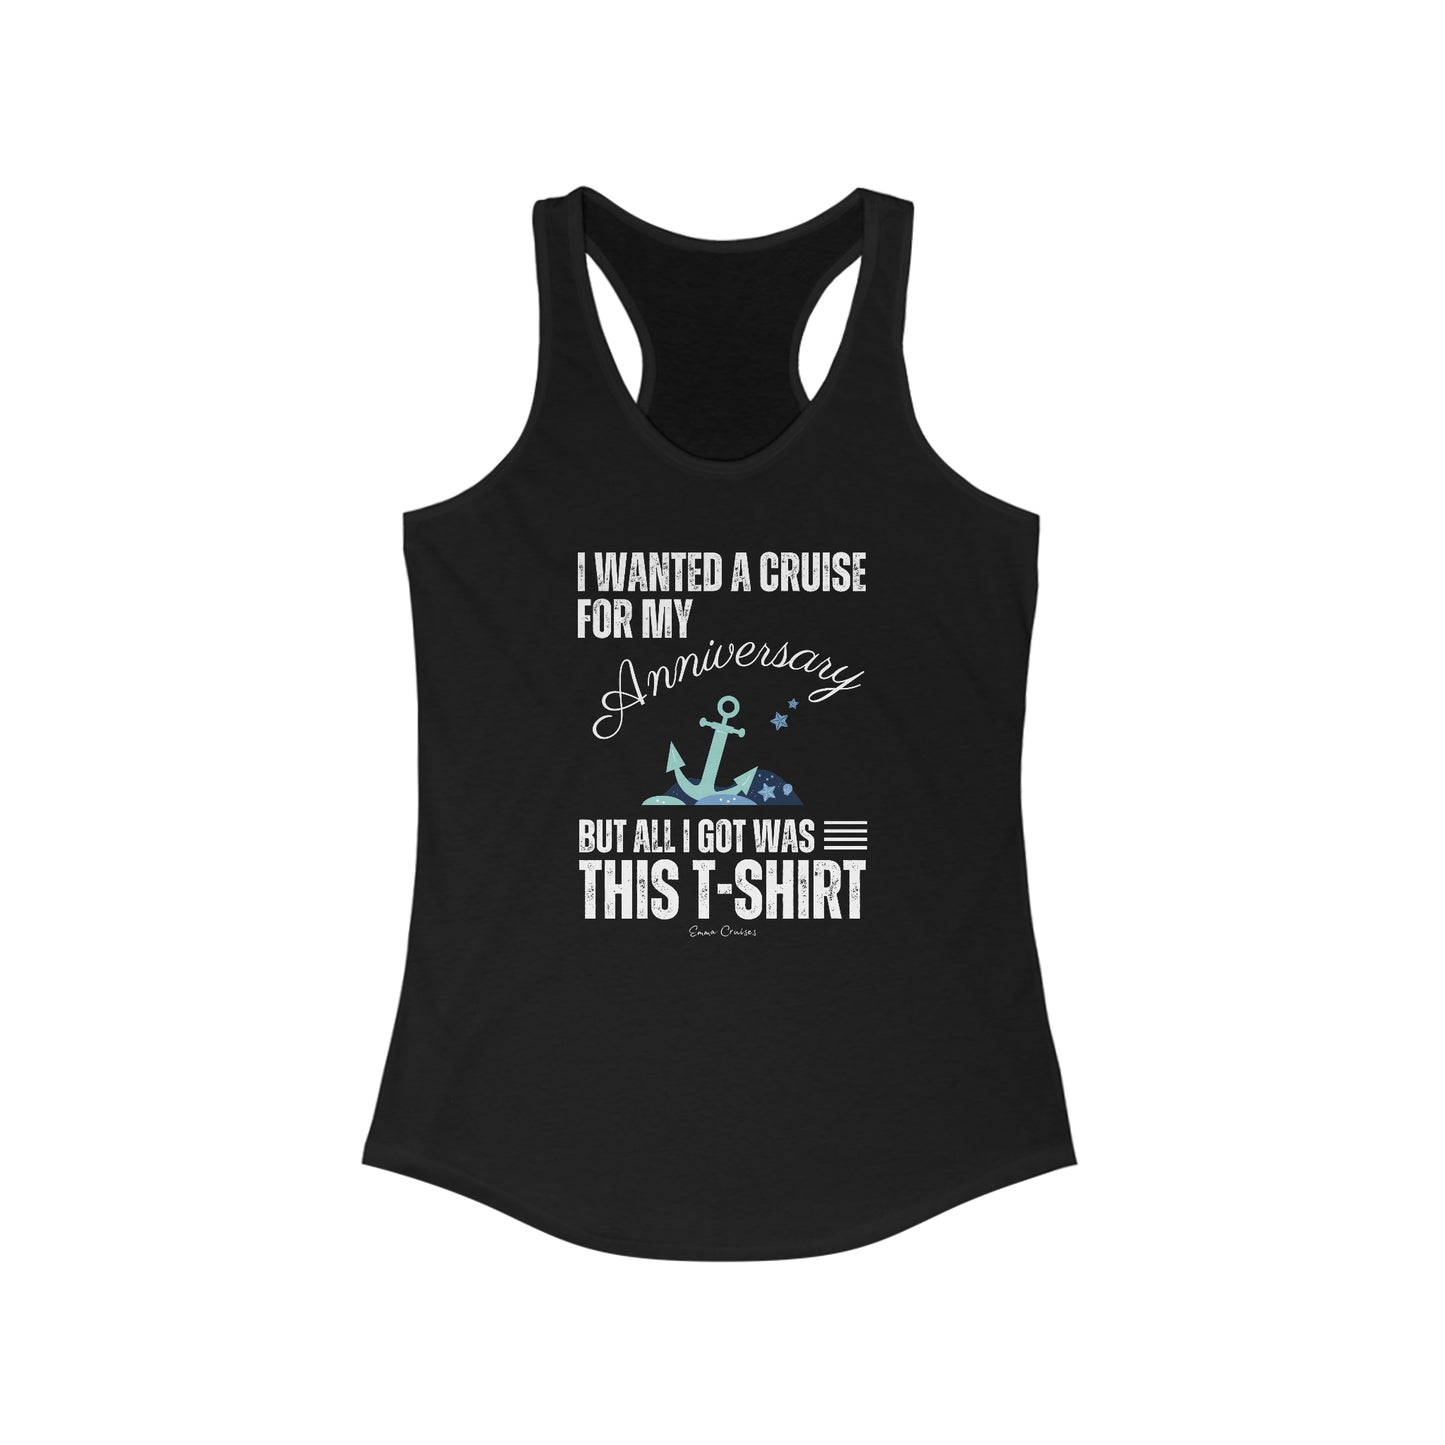 I Wanted a Cruise for My Anniversary - Tank Top